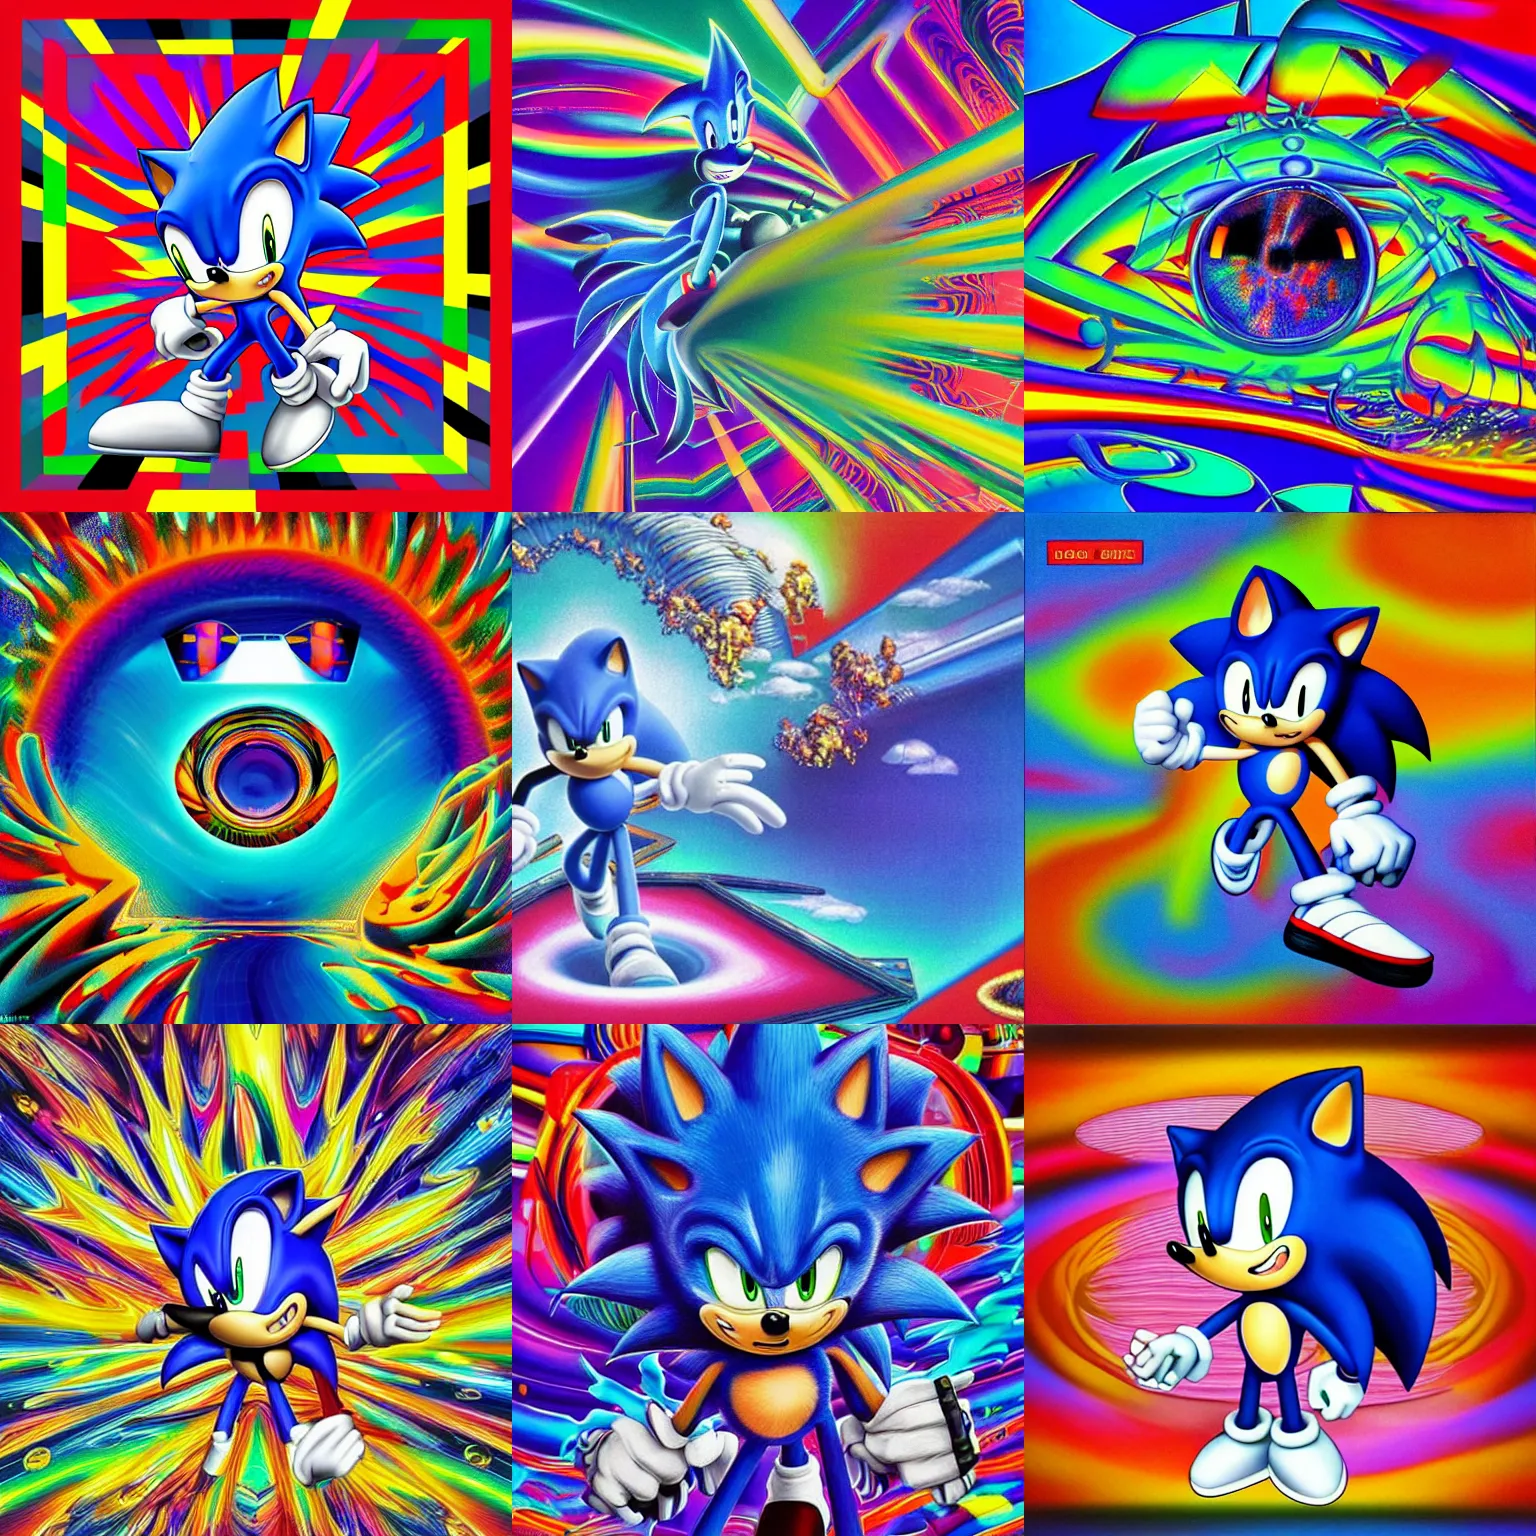 Prompt: surreal, sharp, detailed professional, high quality airbrush art mgmt album cover of a sonic liquid dissolving airbrush art lsd dmt sonic the hedgehog channel surfing through cyberspace, iridescent checkerboard background, 1 9 9 0 s 1 9 9 2 sega genesis video game album cover